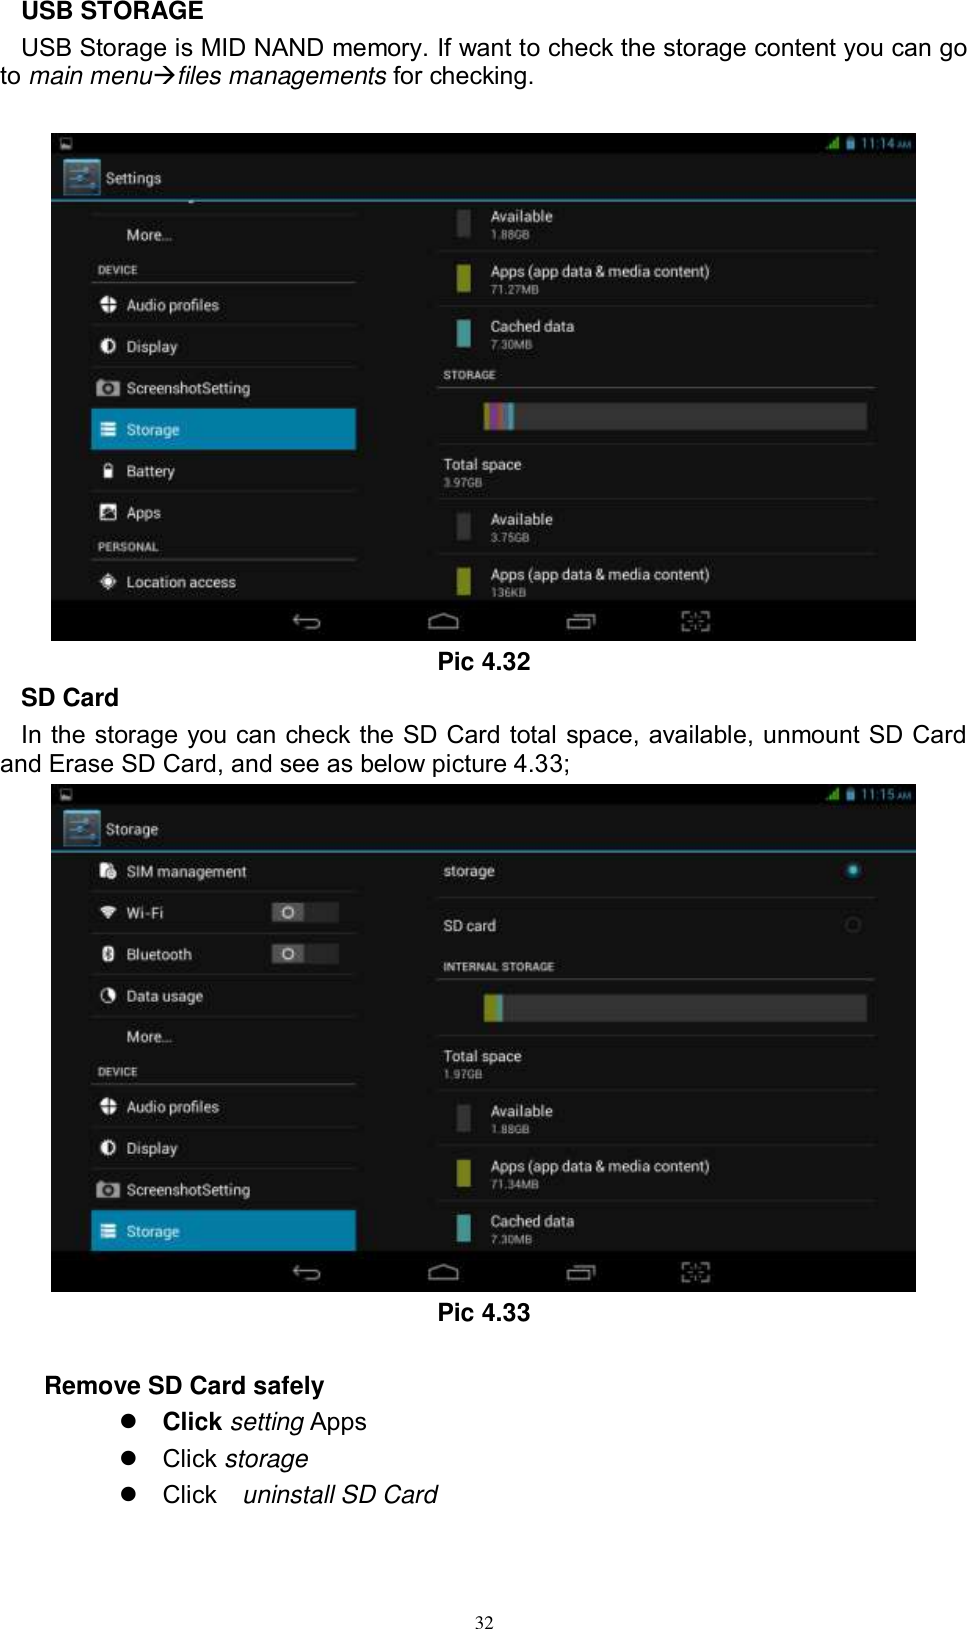      32 USB STORAGE USB Storage is MID NAND memory. If want to check the storage content you can go to main menufiles managements for checking.   Pic 4.32 SD Card In the storage you can check the SD Card total space, available, unmount SD Card and Erase SD Card, and see as below picture 4.33;  Pic 4.33  Remove SD Card safely    Click setting Apps   Click storage   Click    uninstall SD Card 